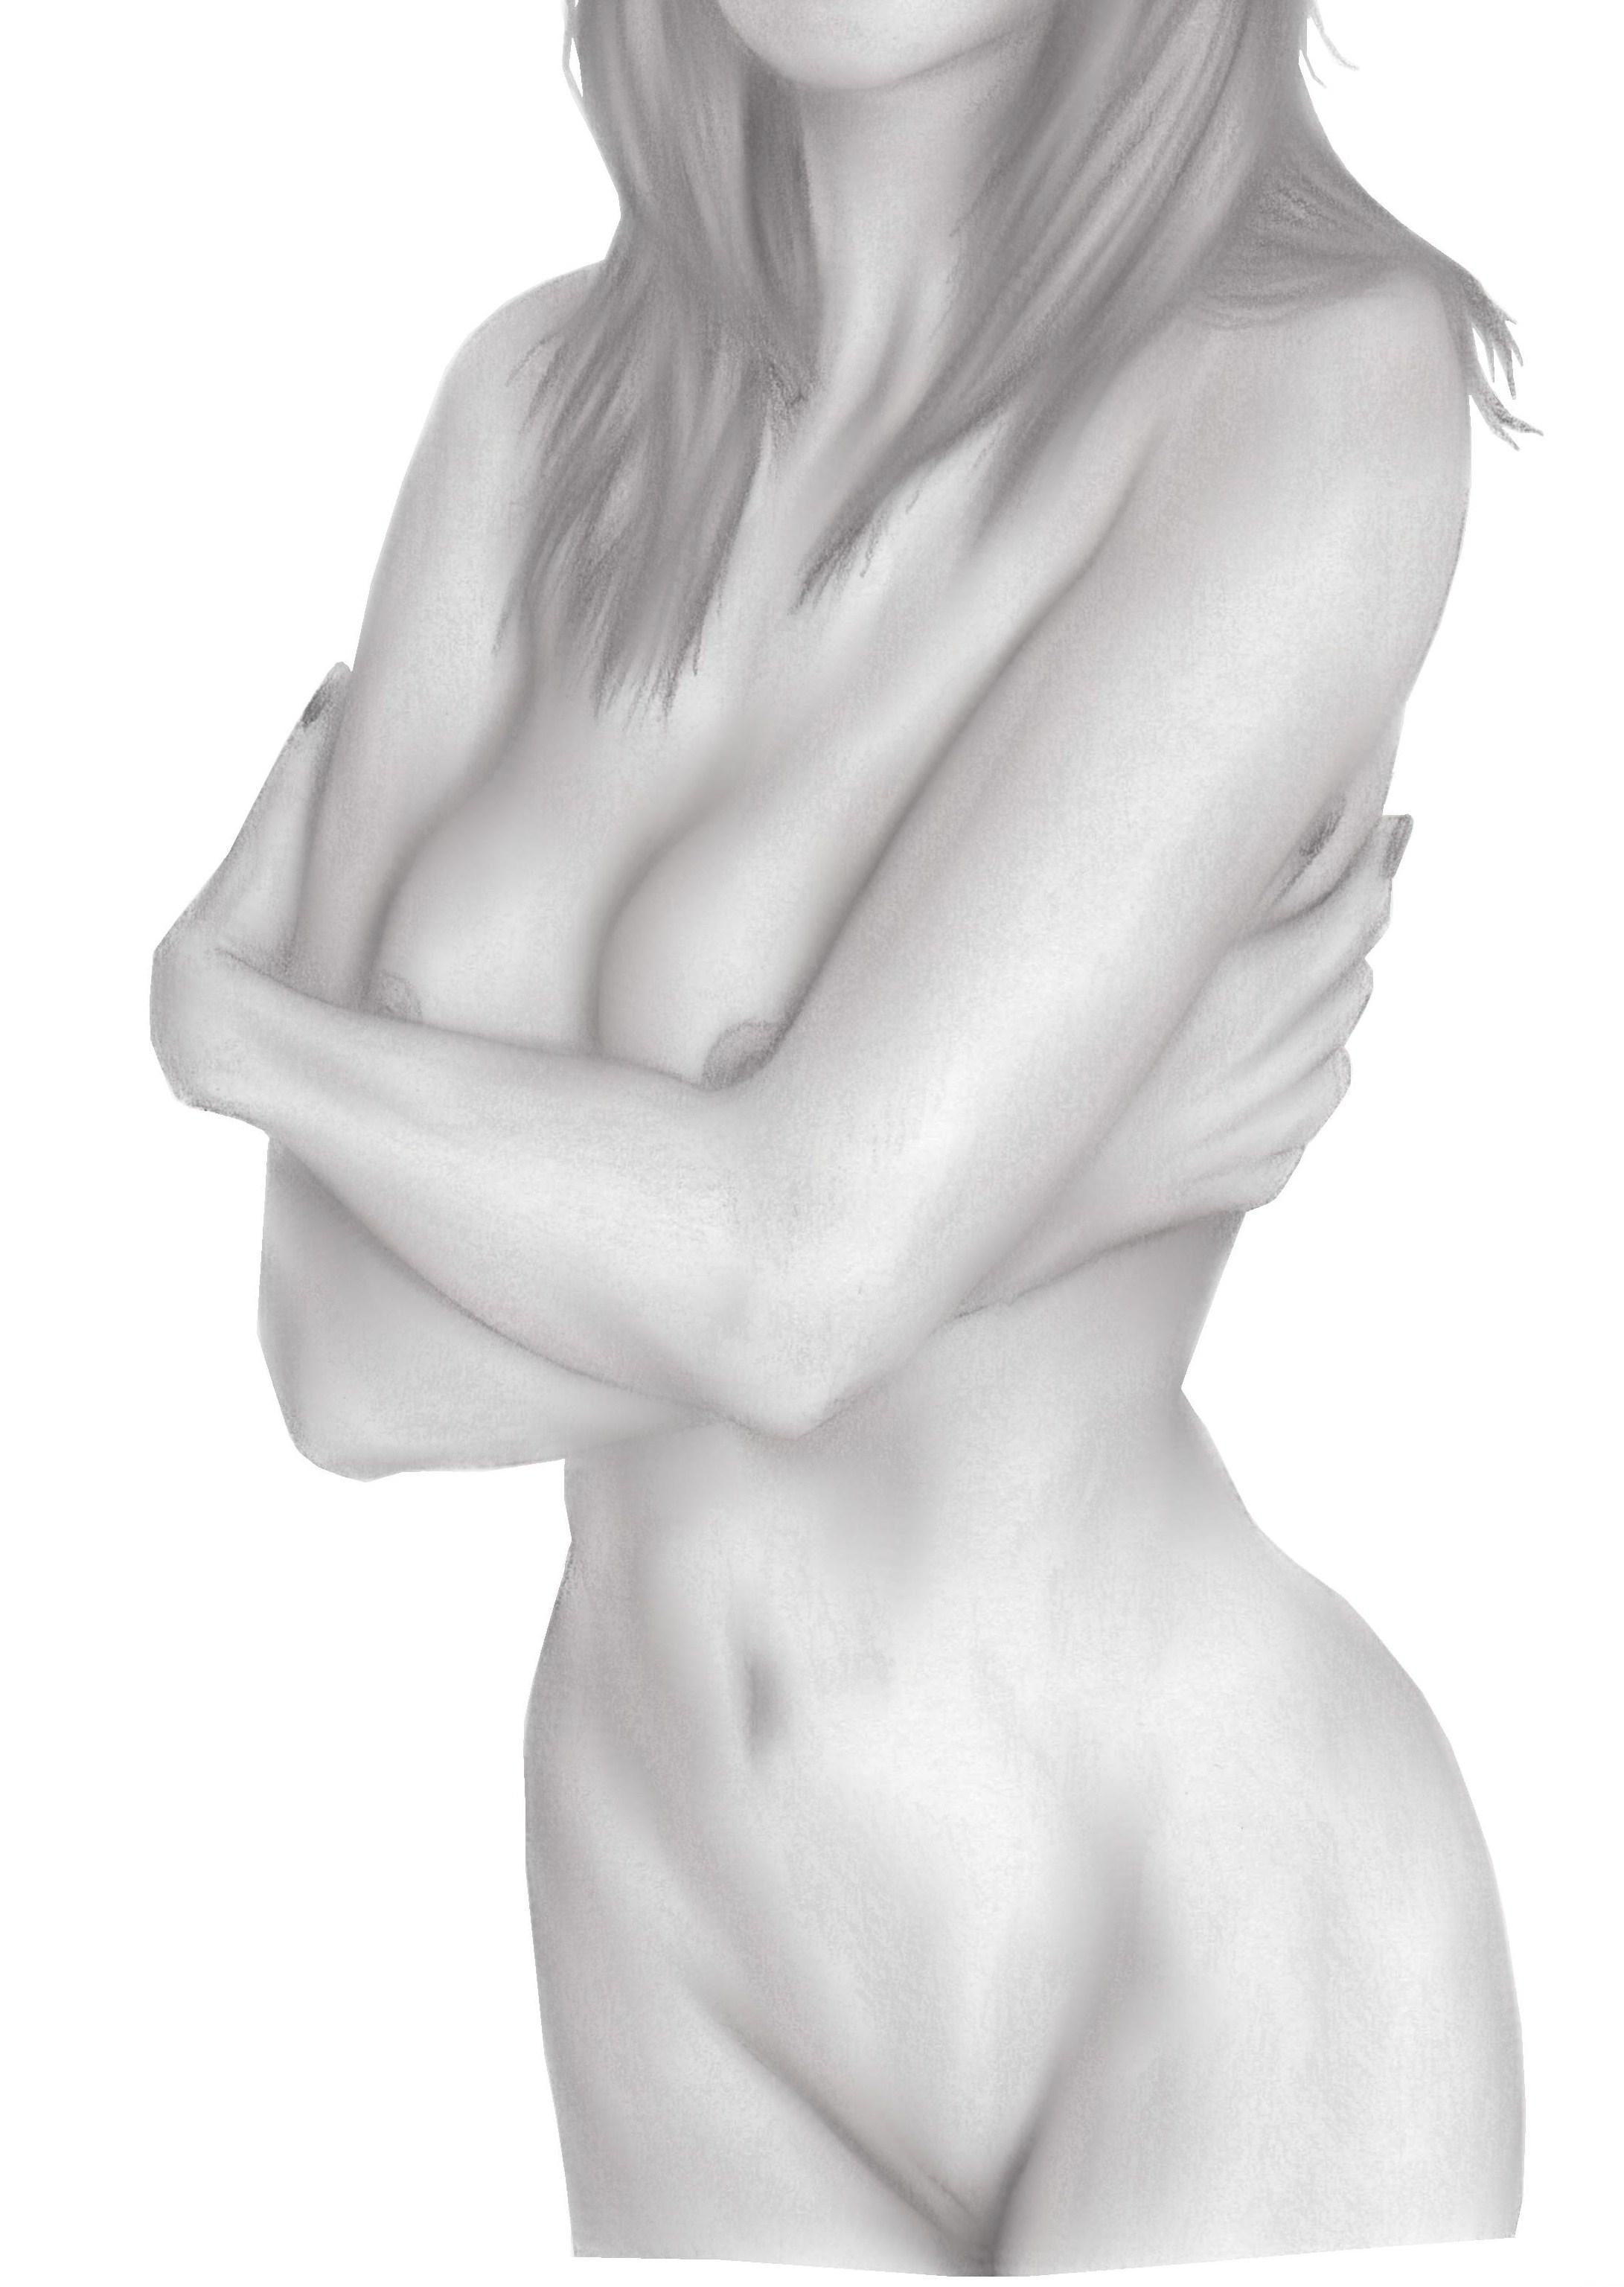 best of Girls naked Sketch boobs of